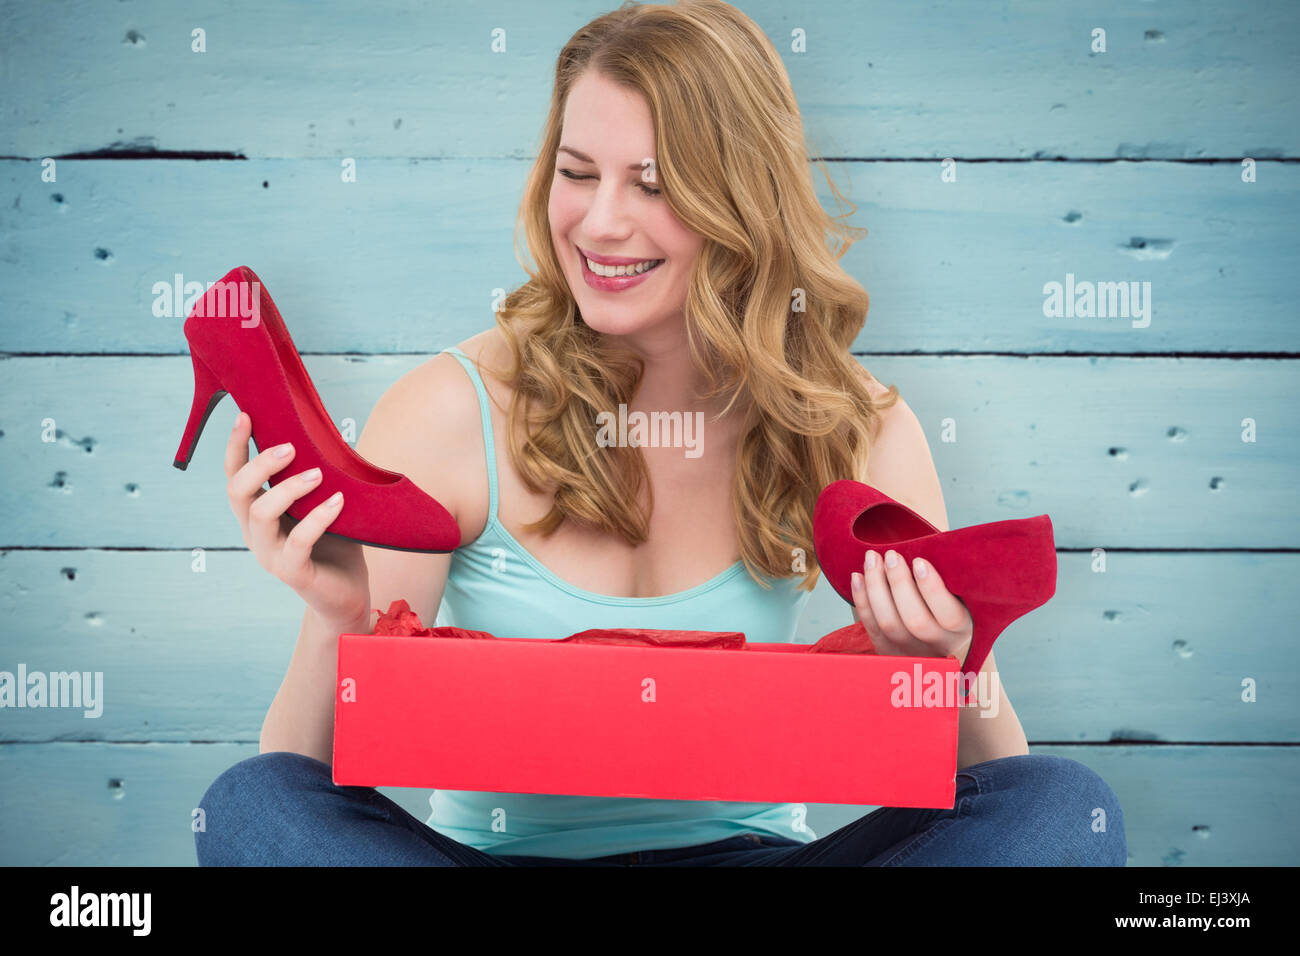 Composite image of blonde woman discovering shoes in a gift box Stock Photo